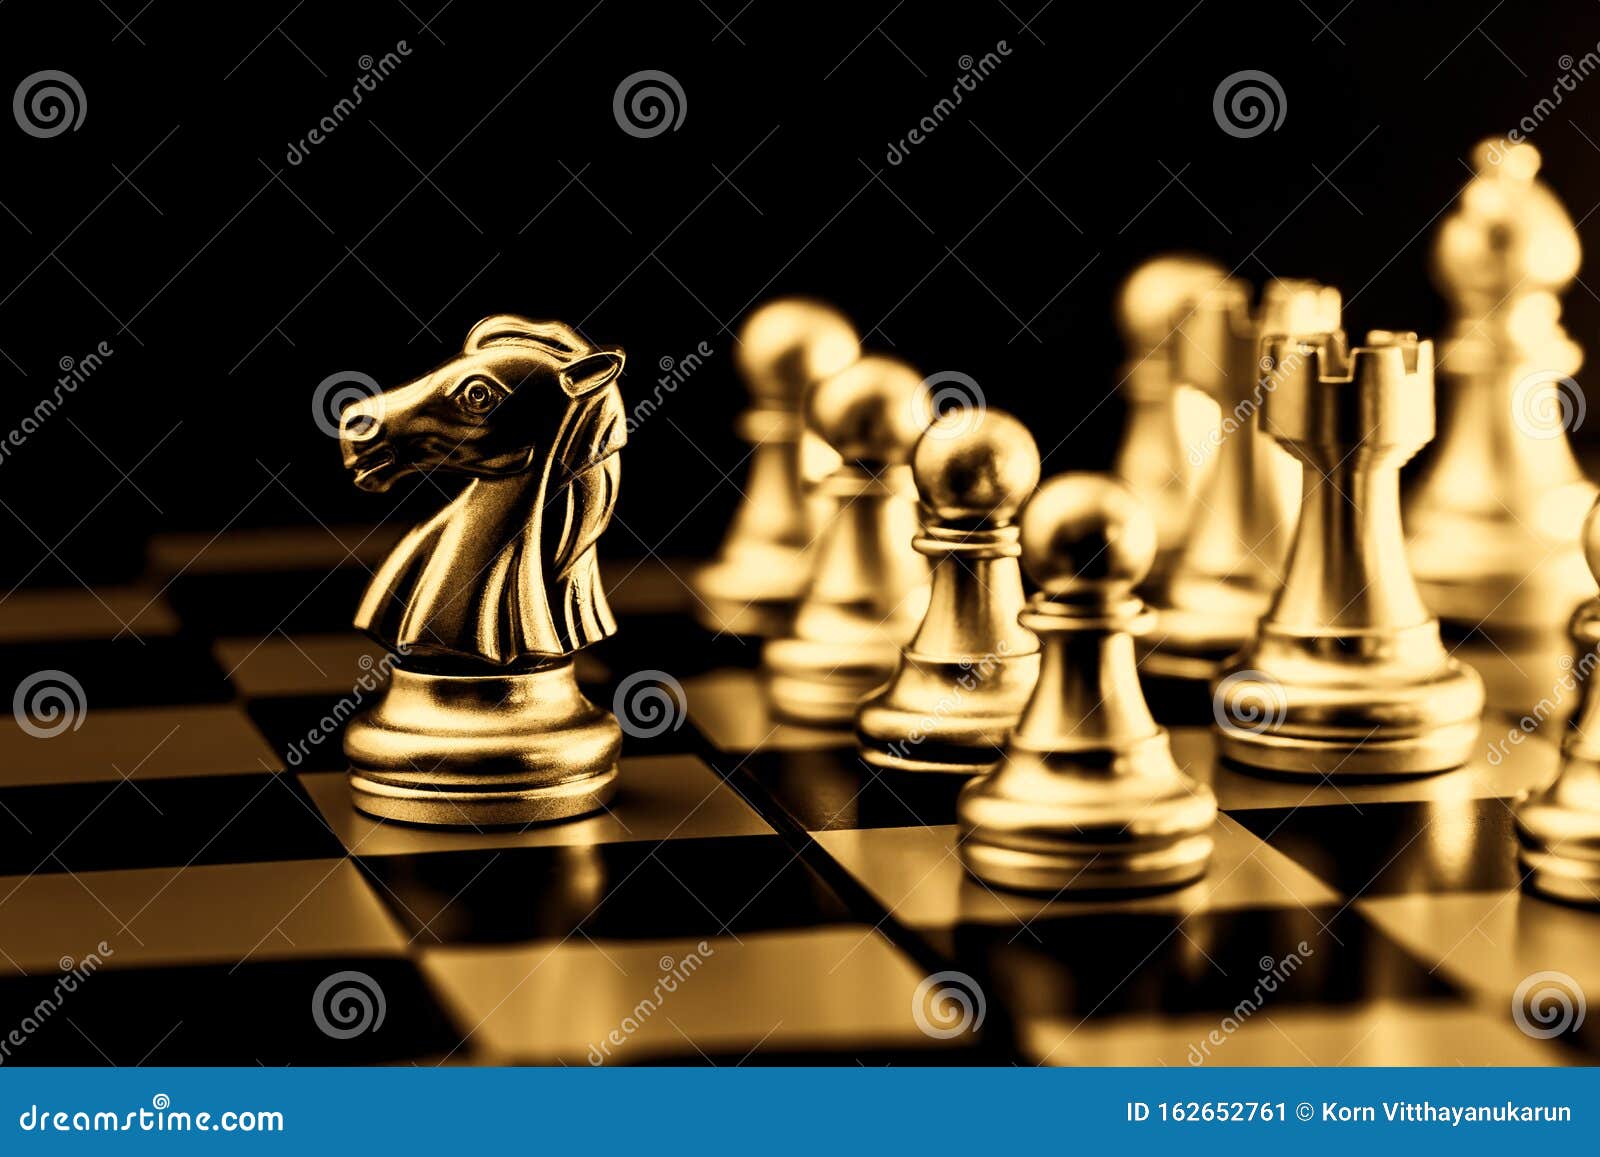 gold chess. elite business team leader luxury rich gorgeous image